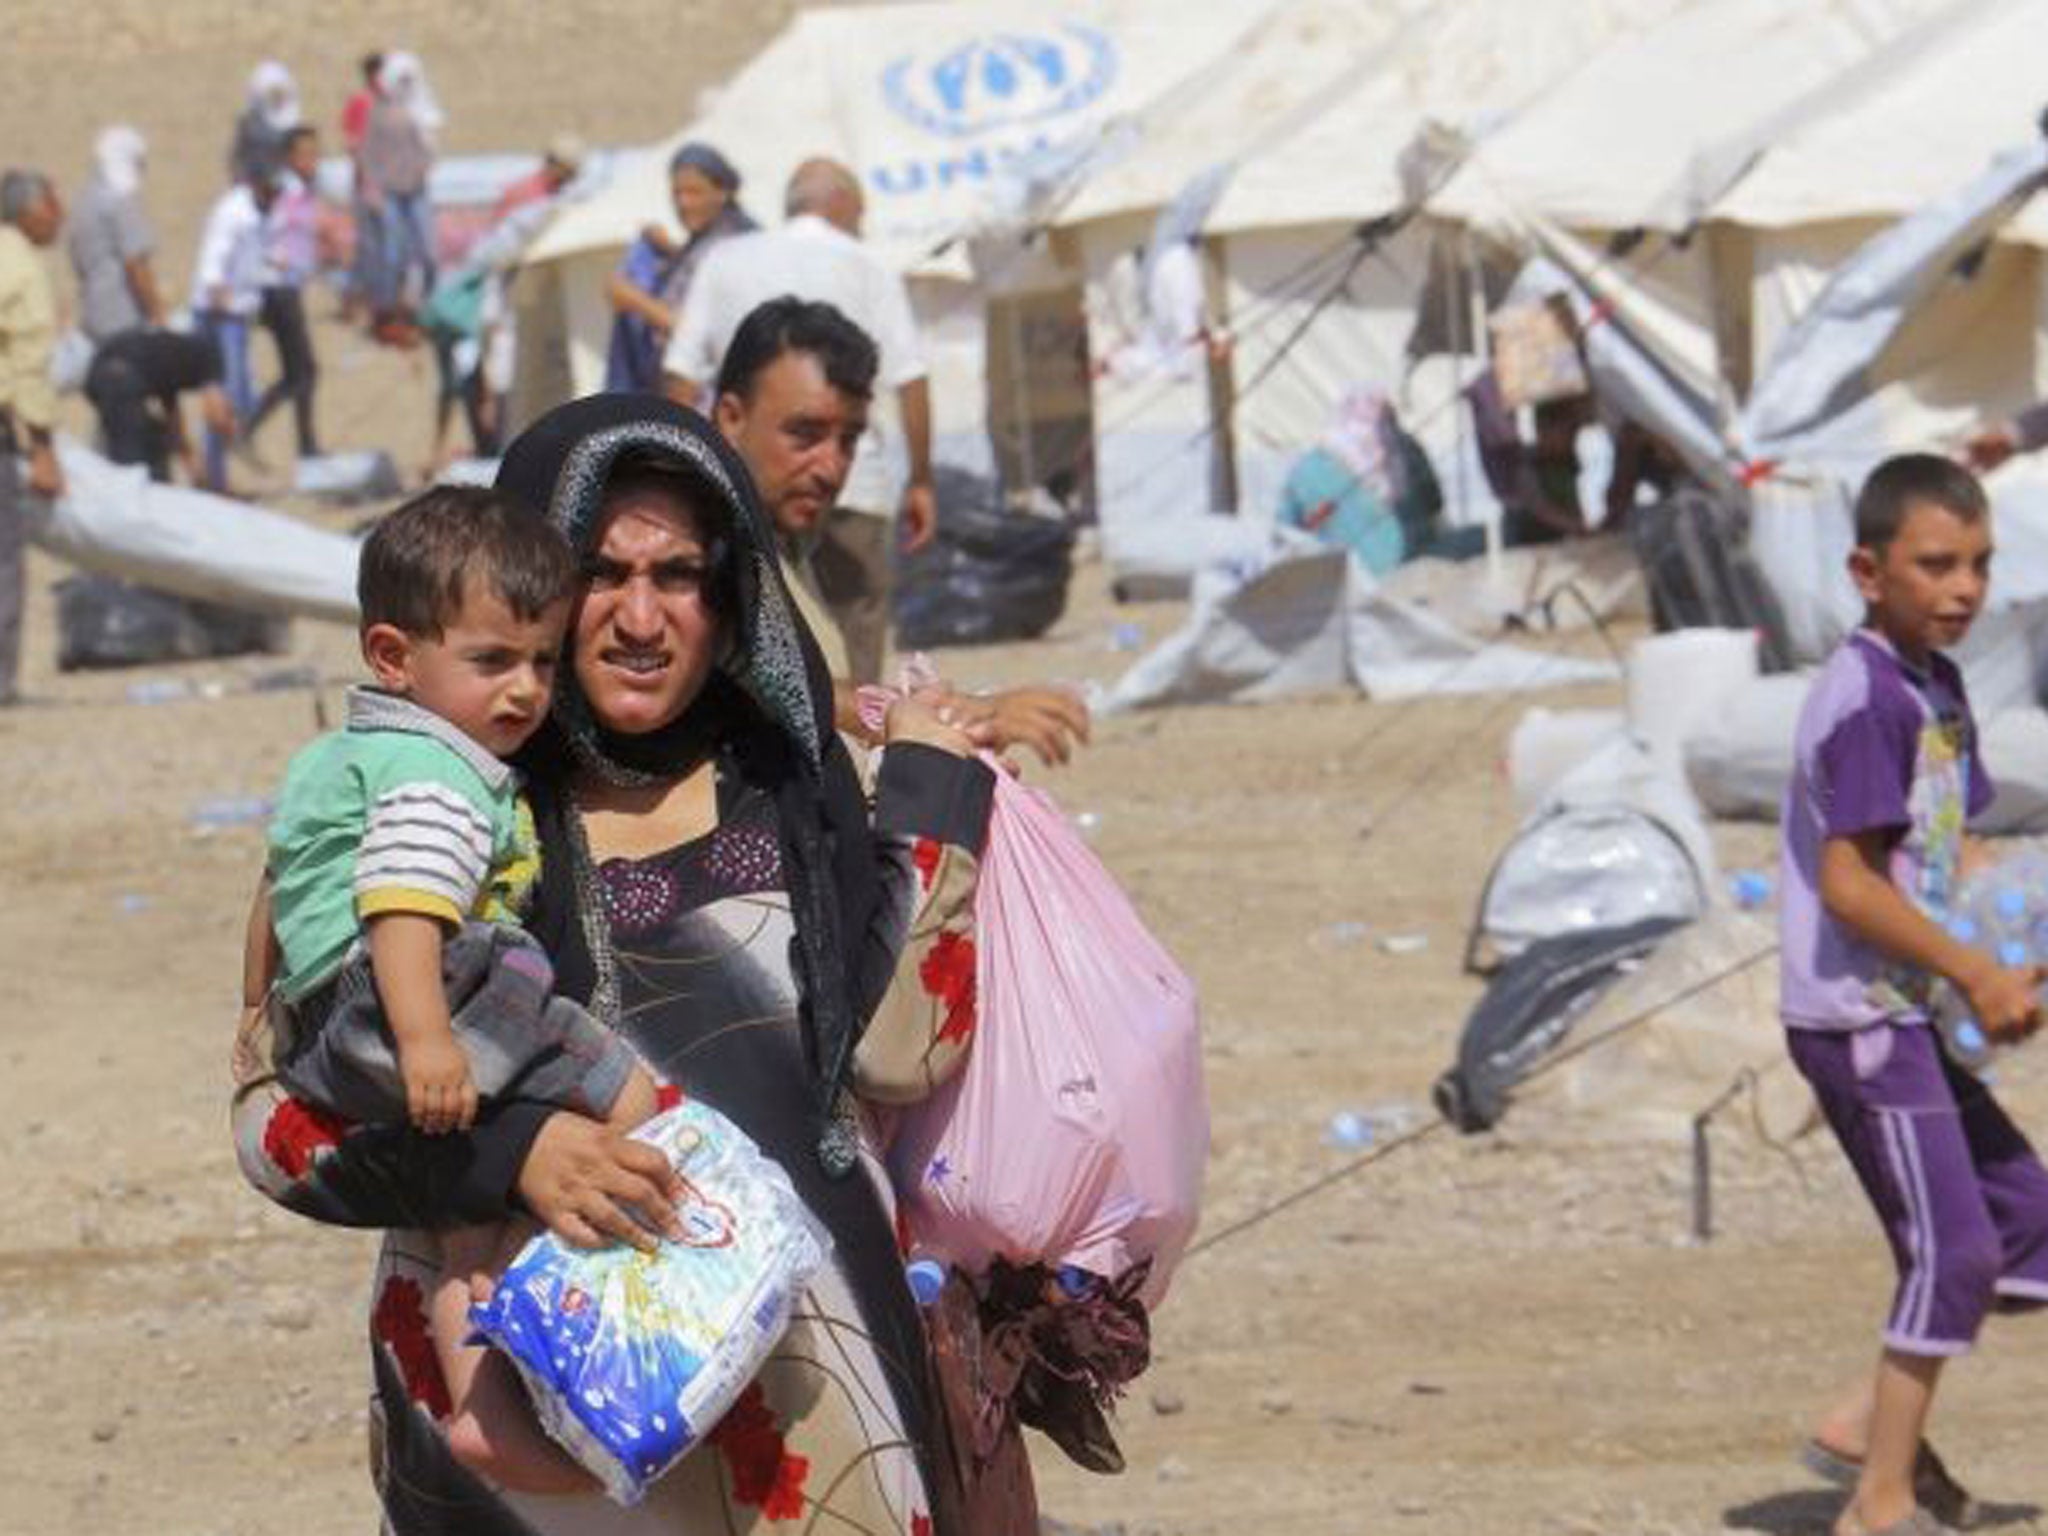 Thousands of Syrian refugees poured into the Kurdistan region of northern Iraq on Thursday, taking advantage of a new bridge along the largely closed border, the United Nations said on Friday